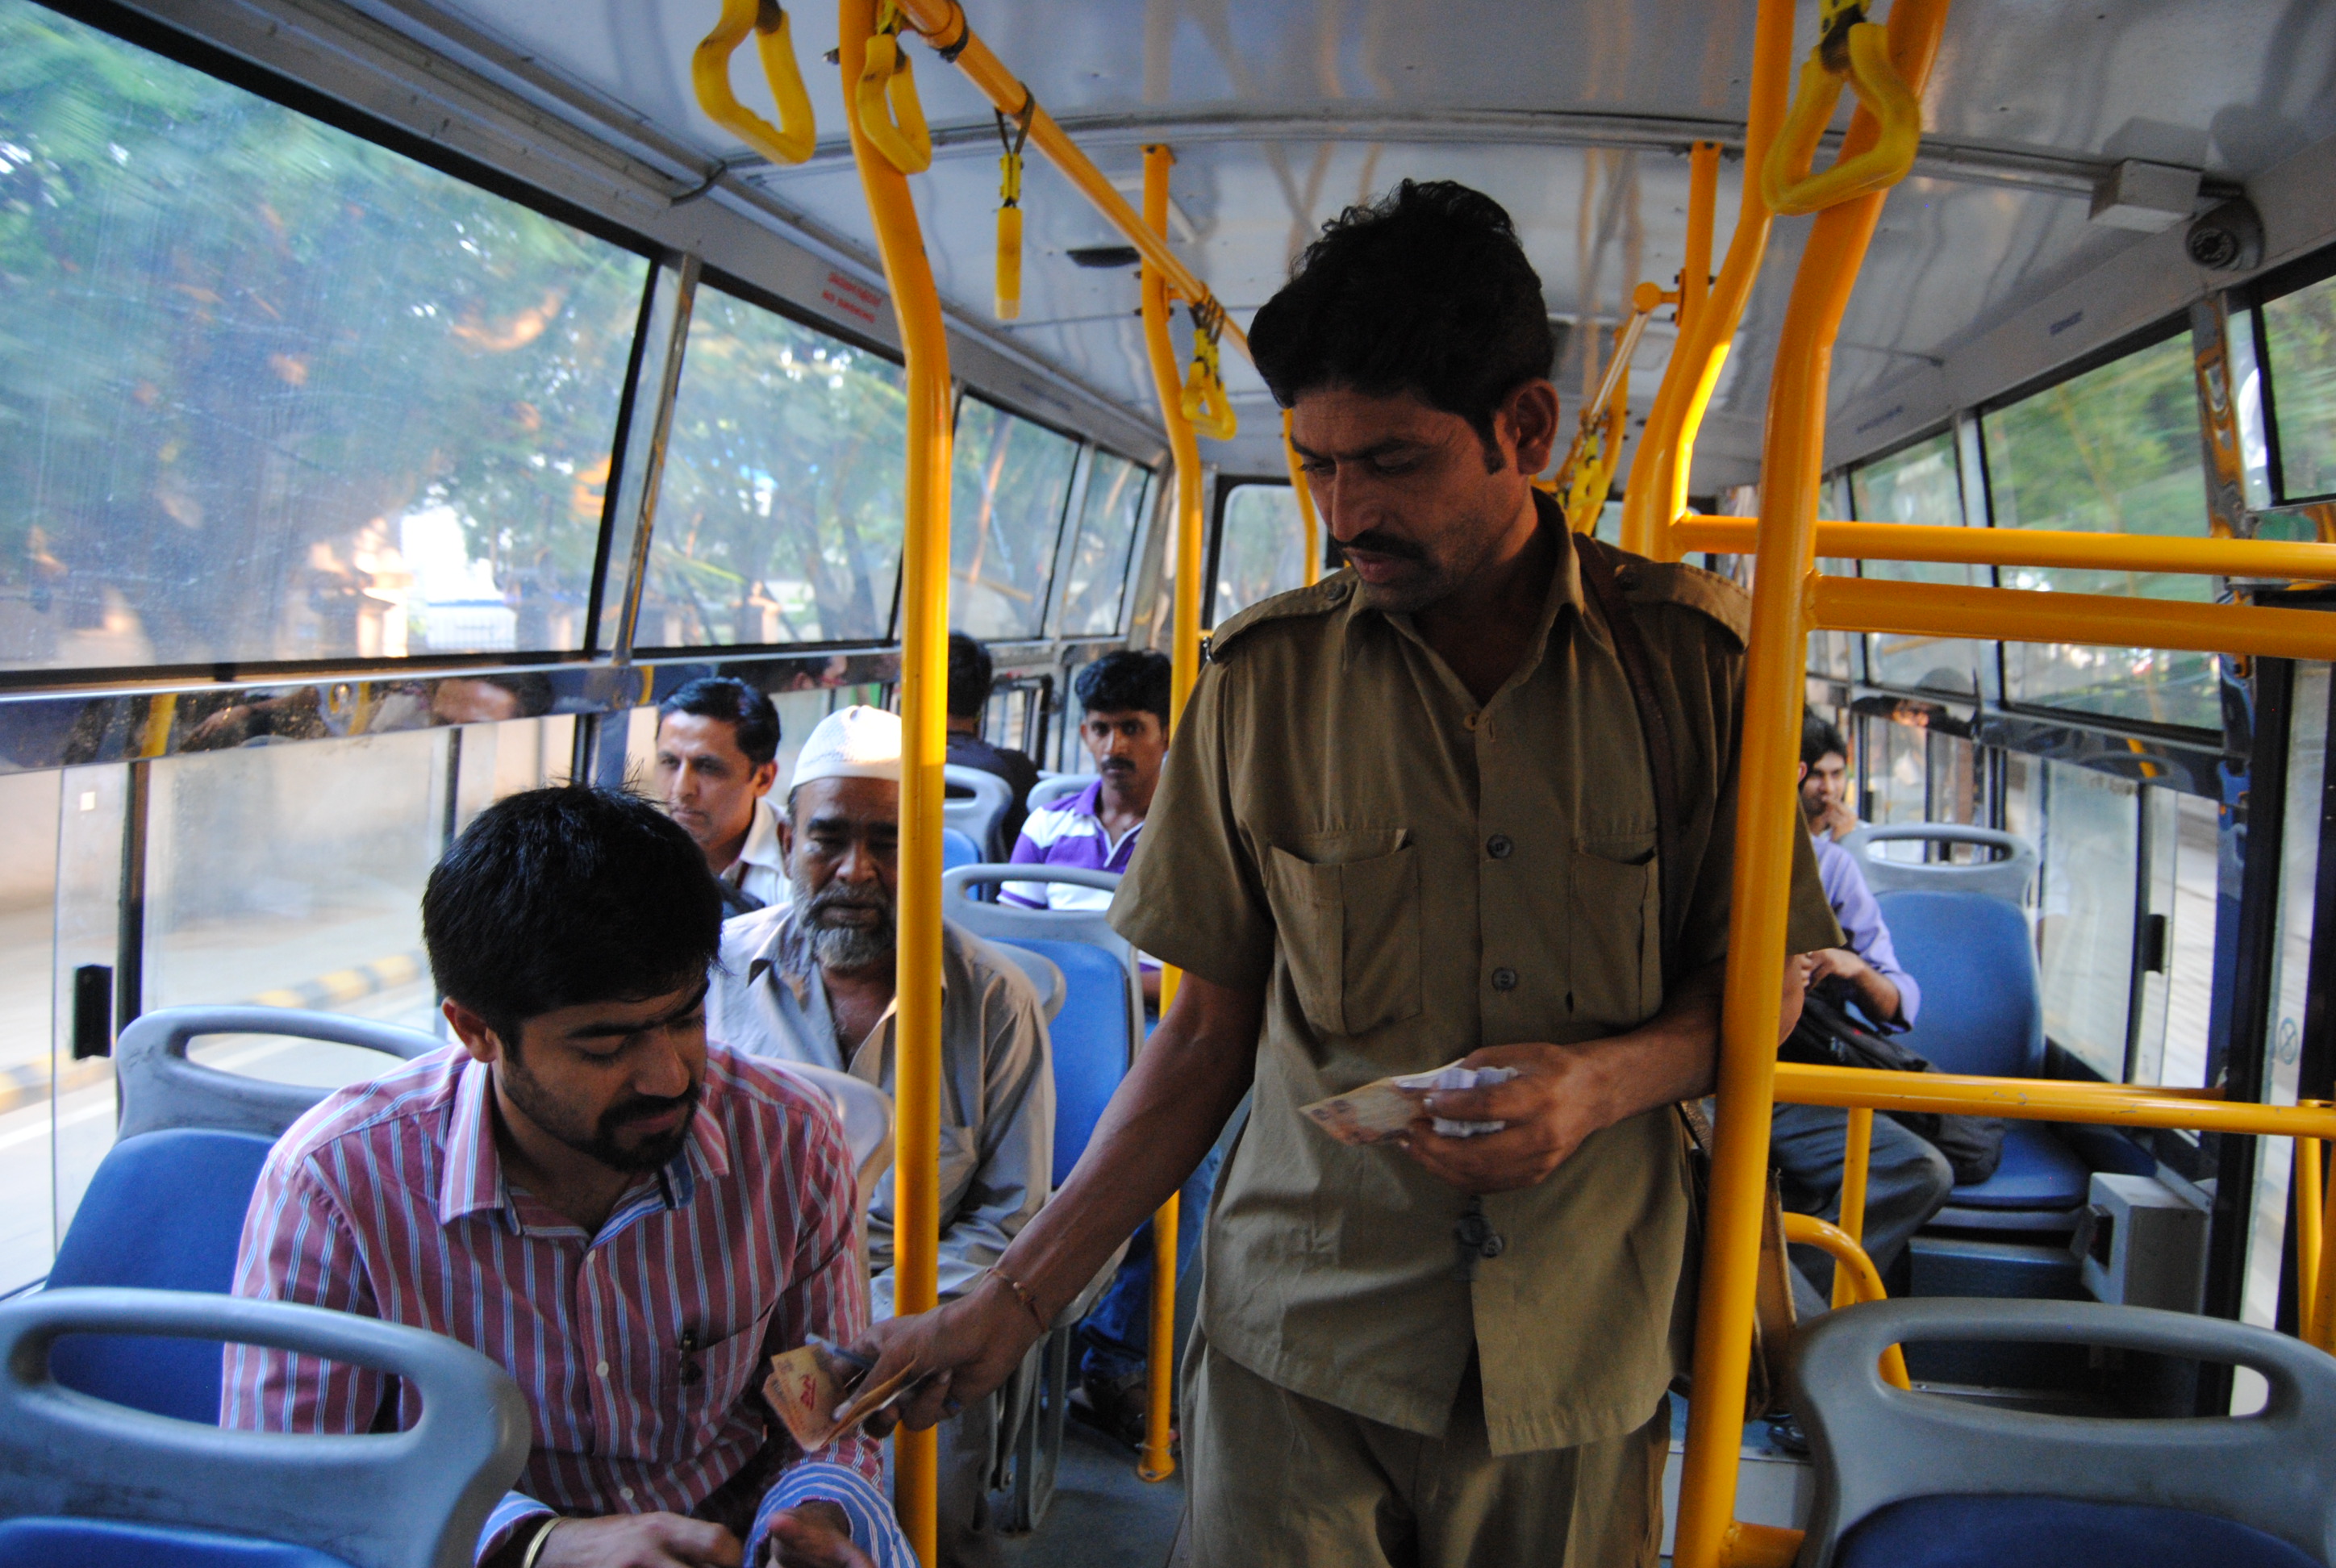 wealth of information can be obtained by understanding India’s bus systems